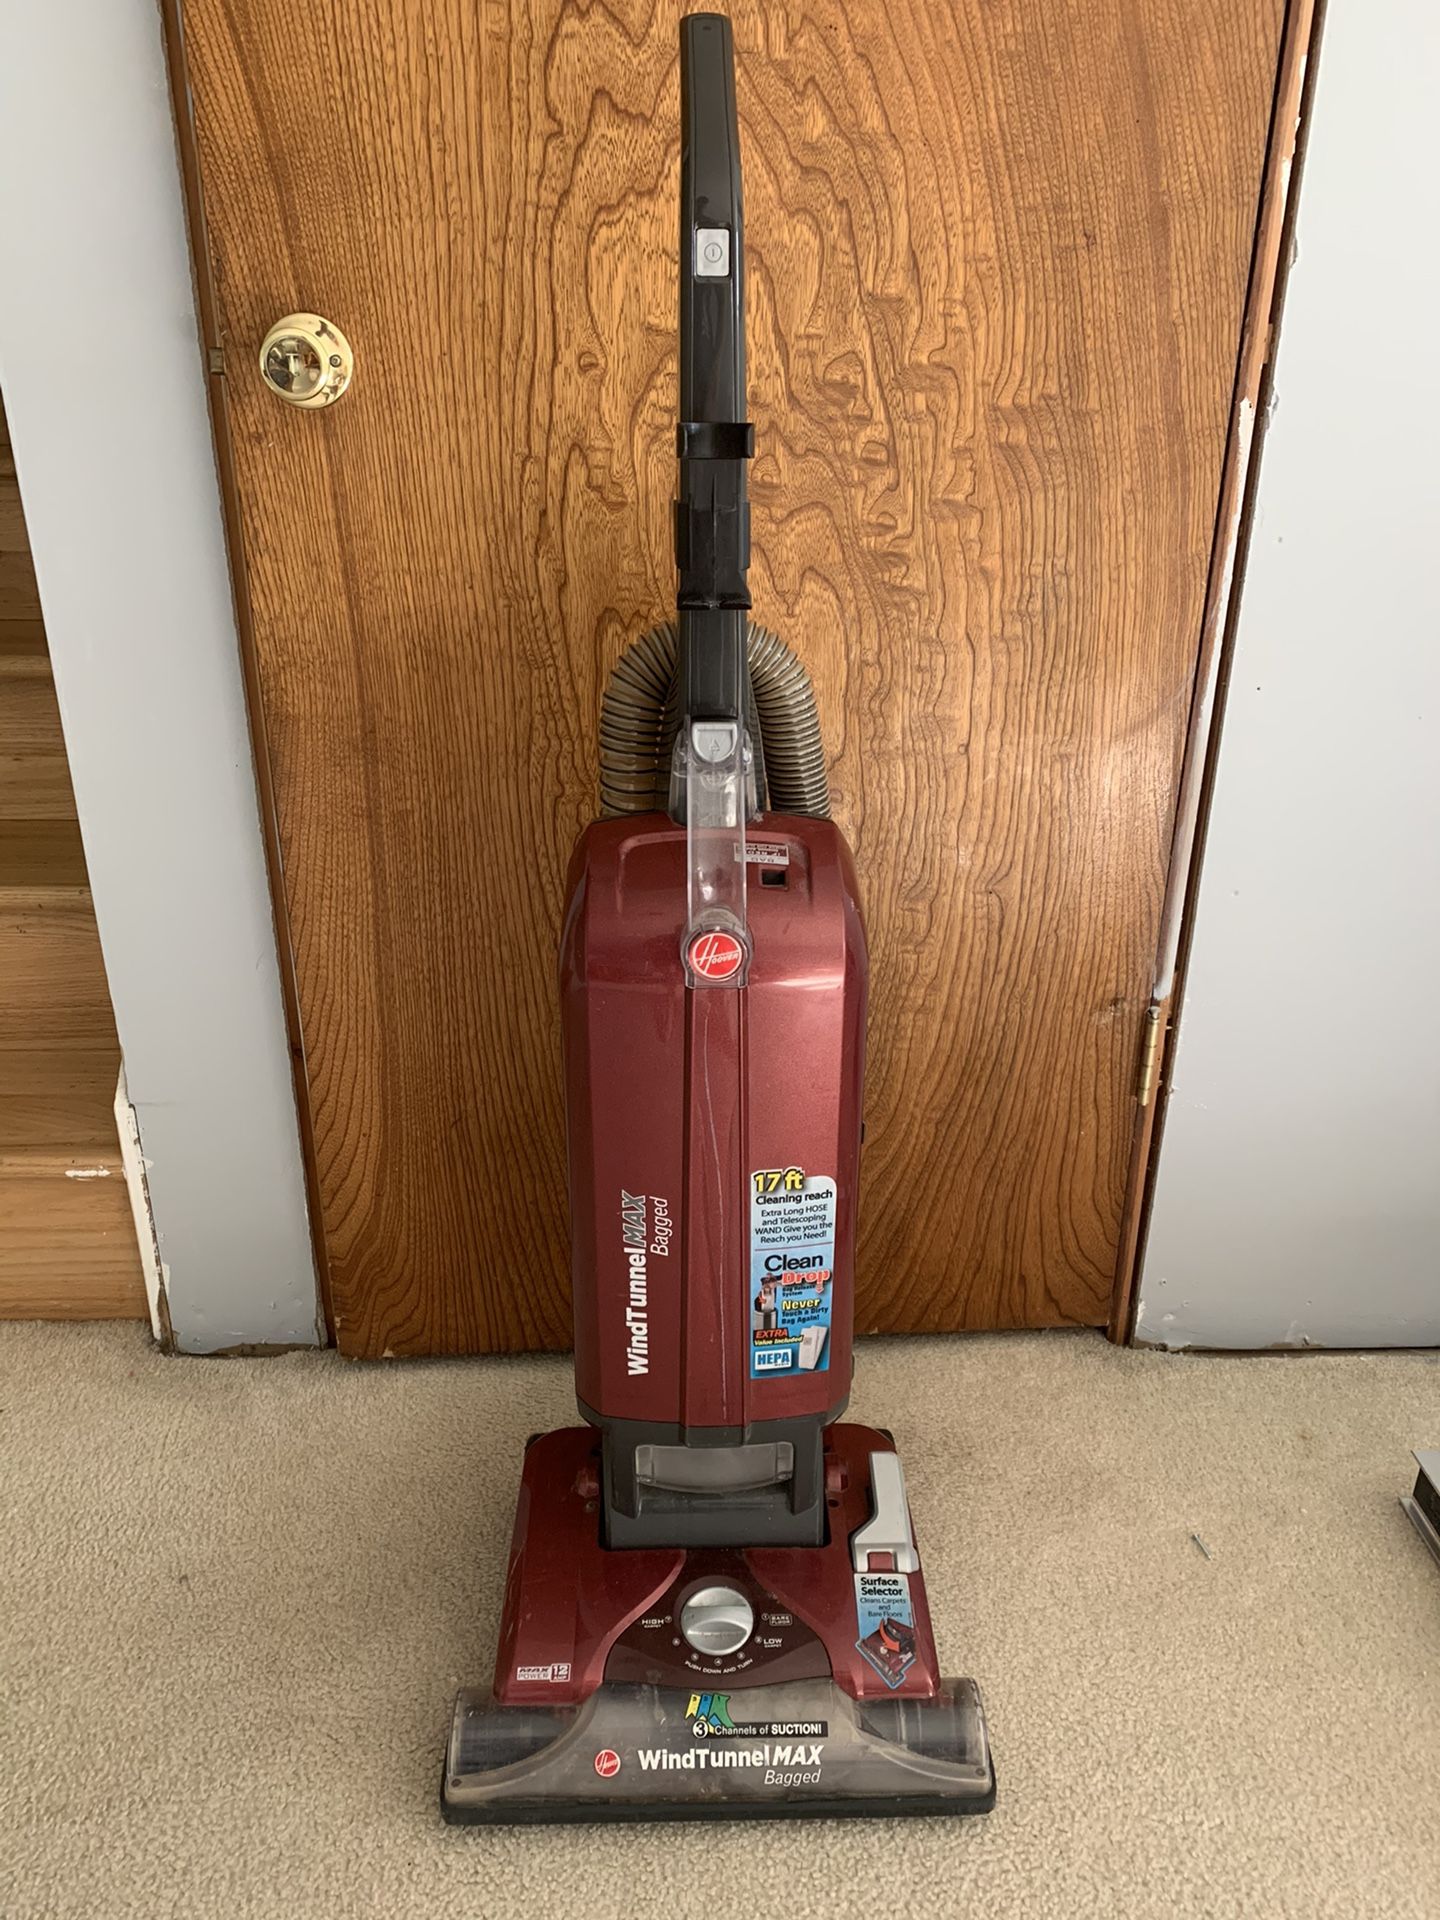 Hoover UH30600 WindTunnel MAX Bagged Upright Vacuum